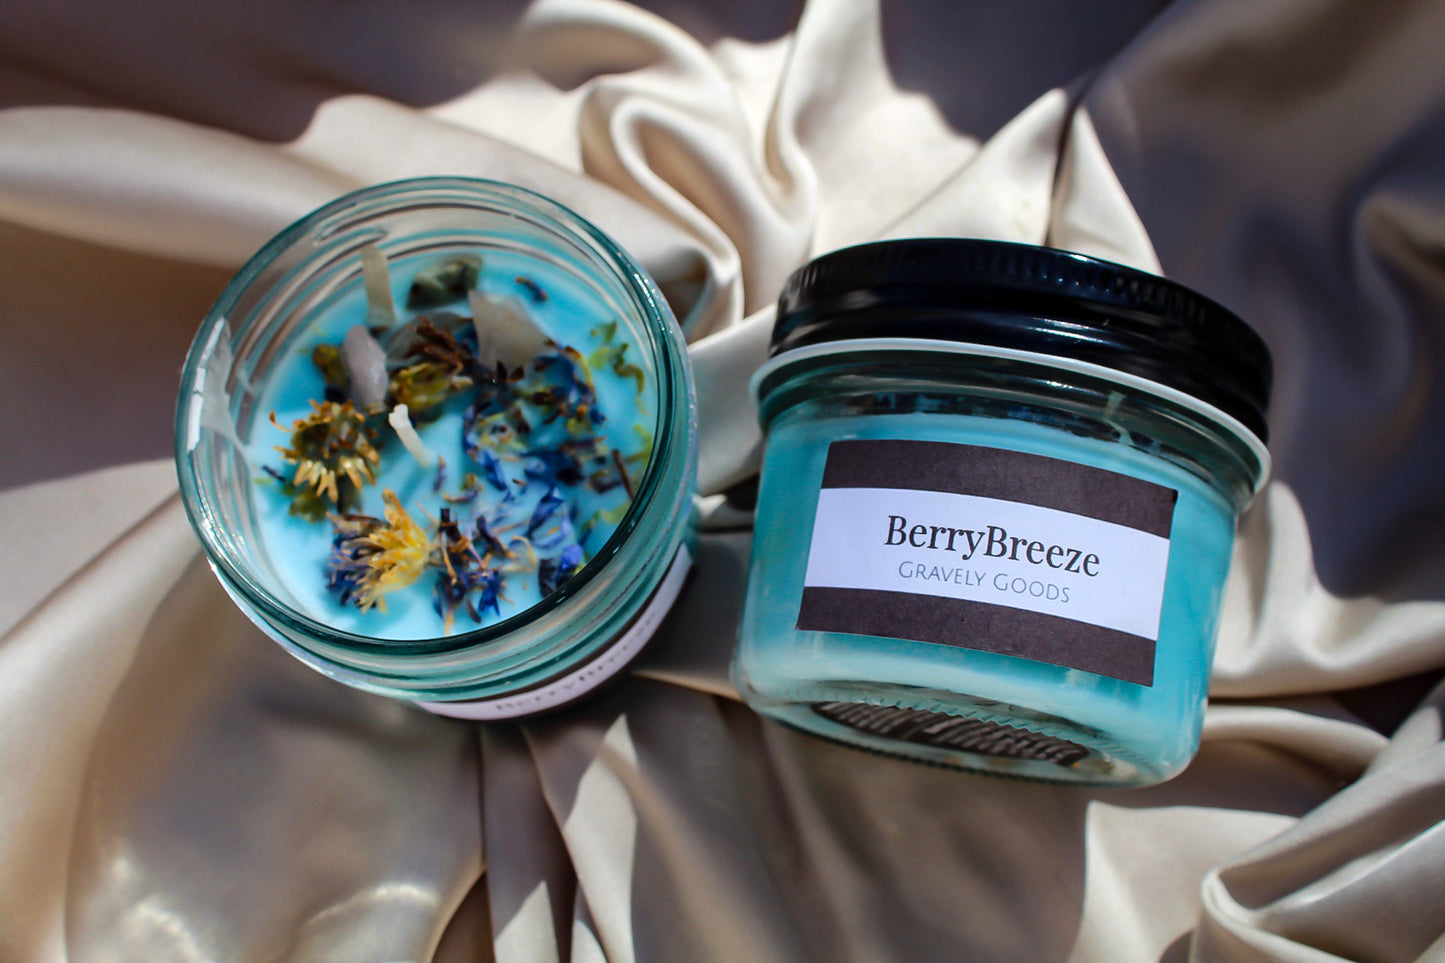 Berry Breeze Crystal Candle by Gravely Goods